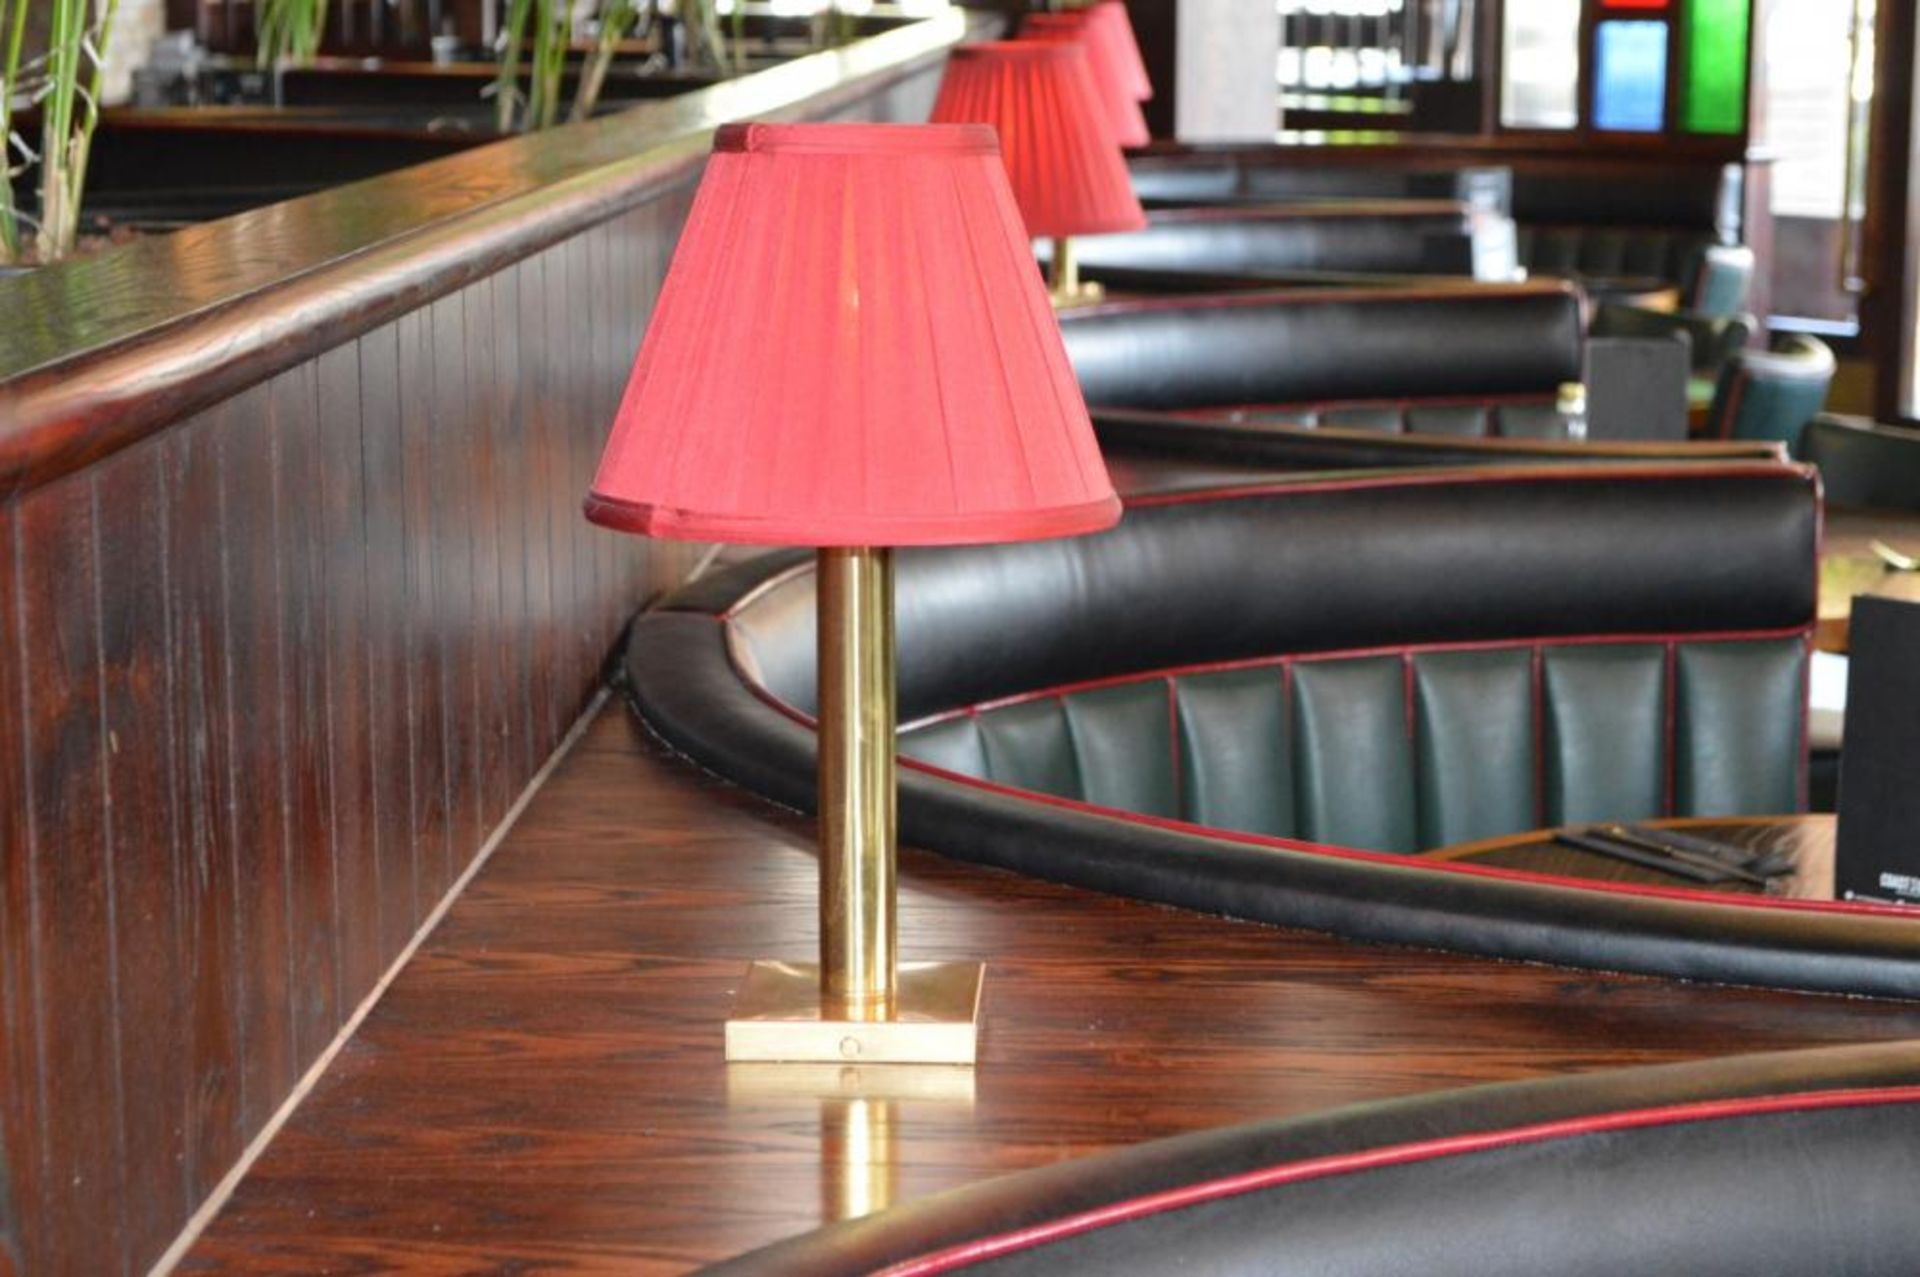 5 x Fixed Table Lamps With a Brass Finish and Red Shades -Total Height 46cms - Image 2 of 3